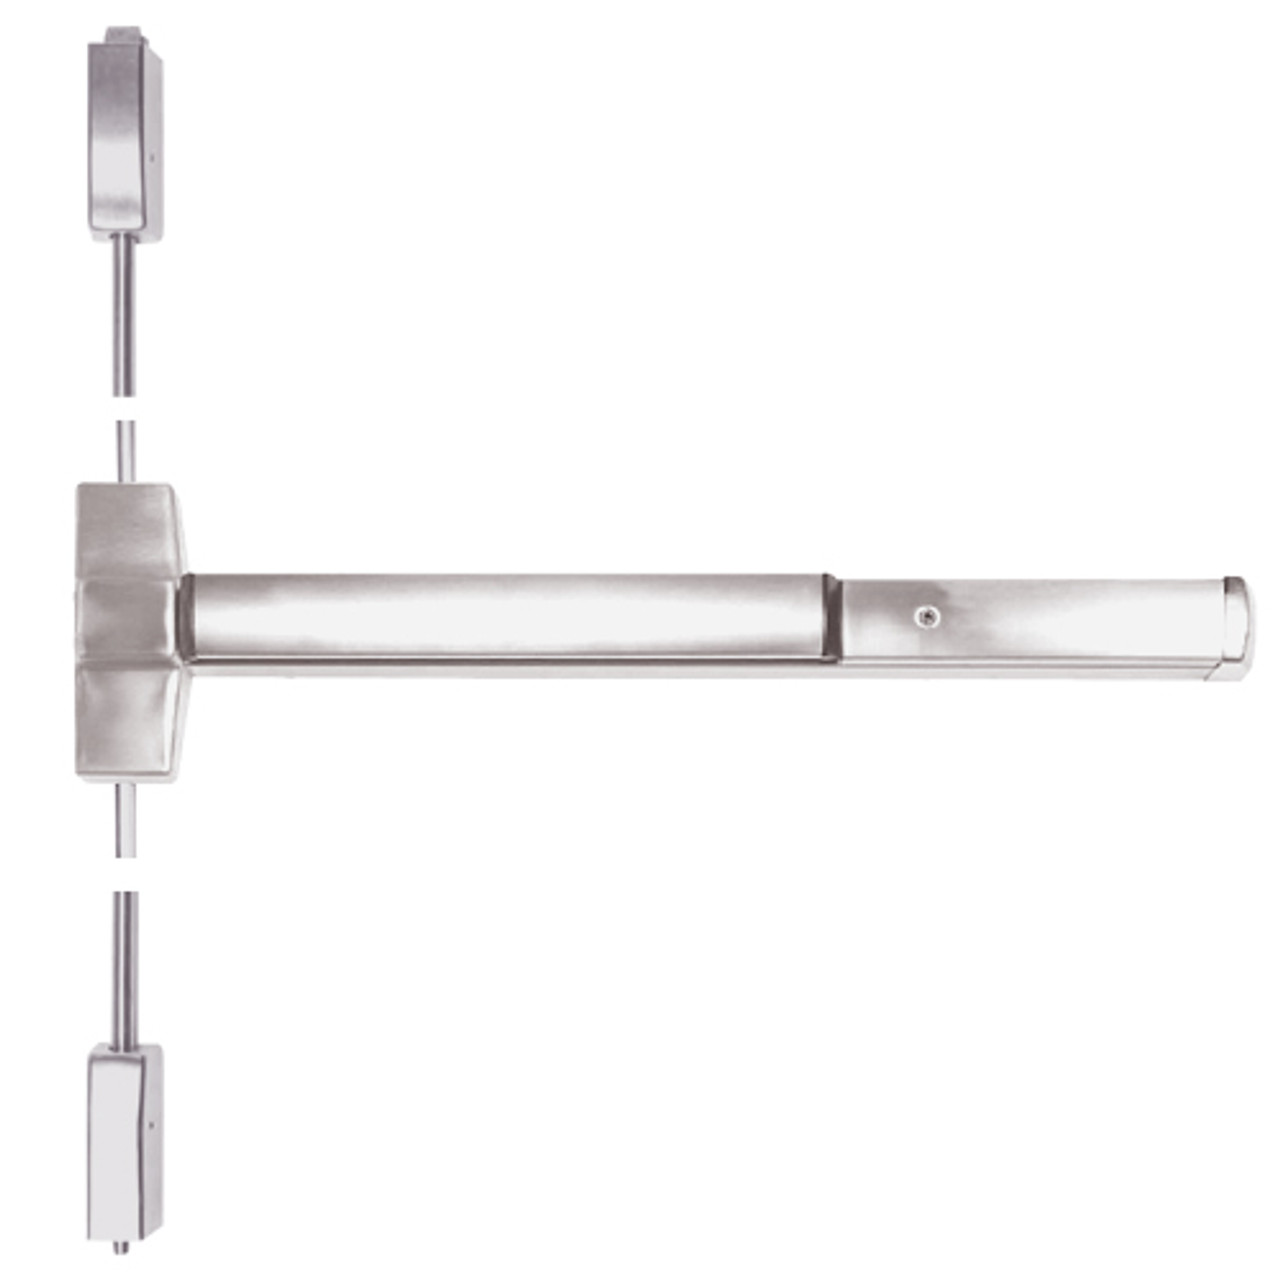 ED5400-630-W048-M61 Corbin ED5400 Series Non Fire Rated Vertical Rod Exit Device with Exit Alarm Device in Satin Stainless Steel Finish